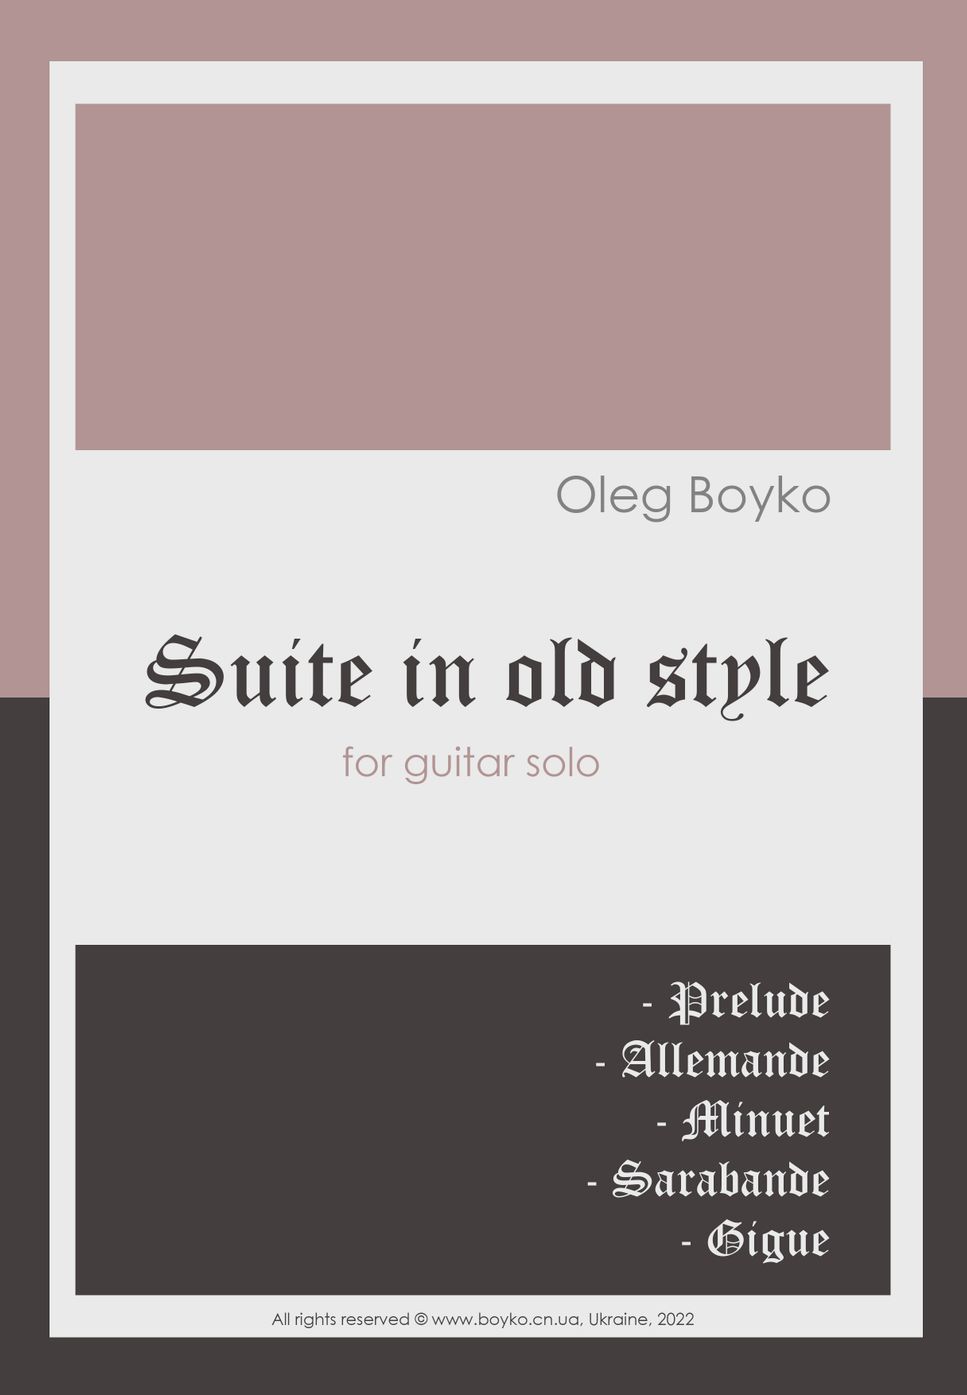 Oleg Boyko - Suite in old style for guitar solo (- Prelude,  Allemande, Minuet, Sarabande, Gigue)